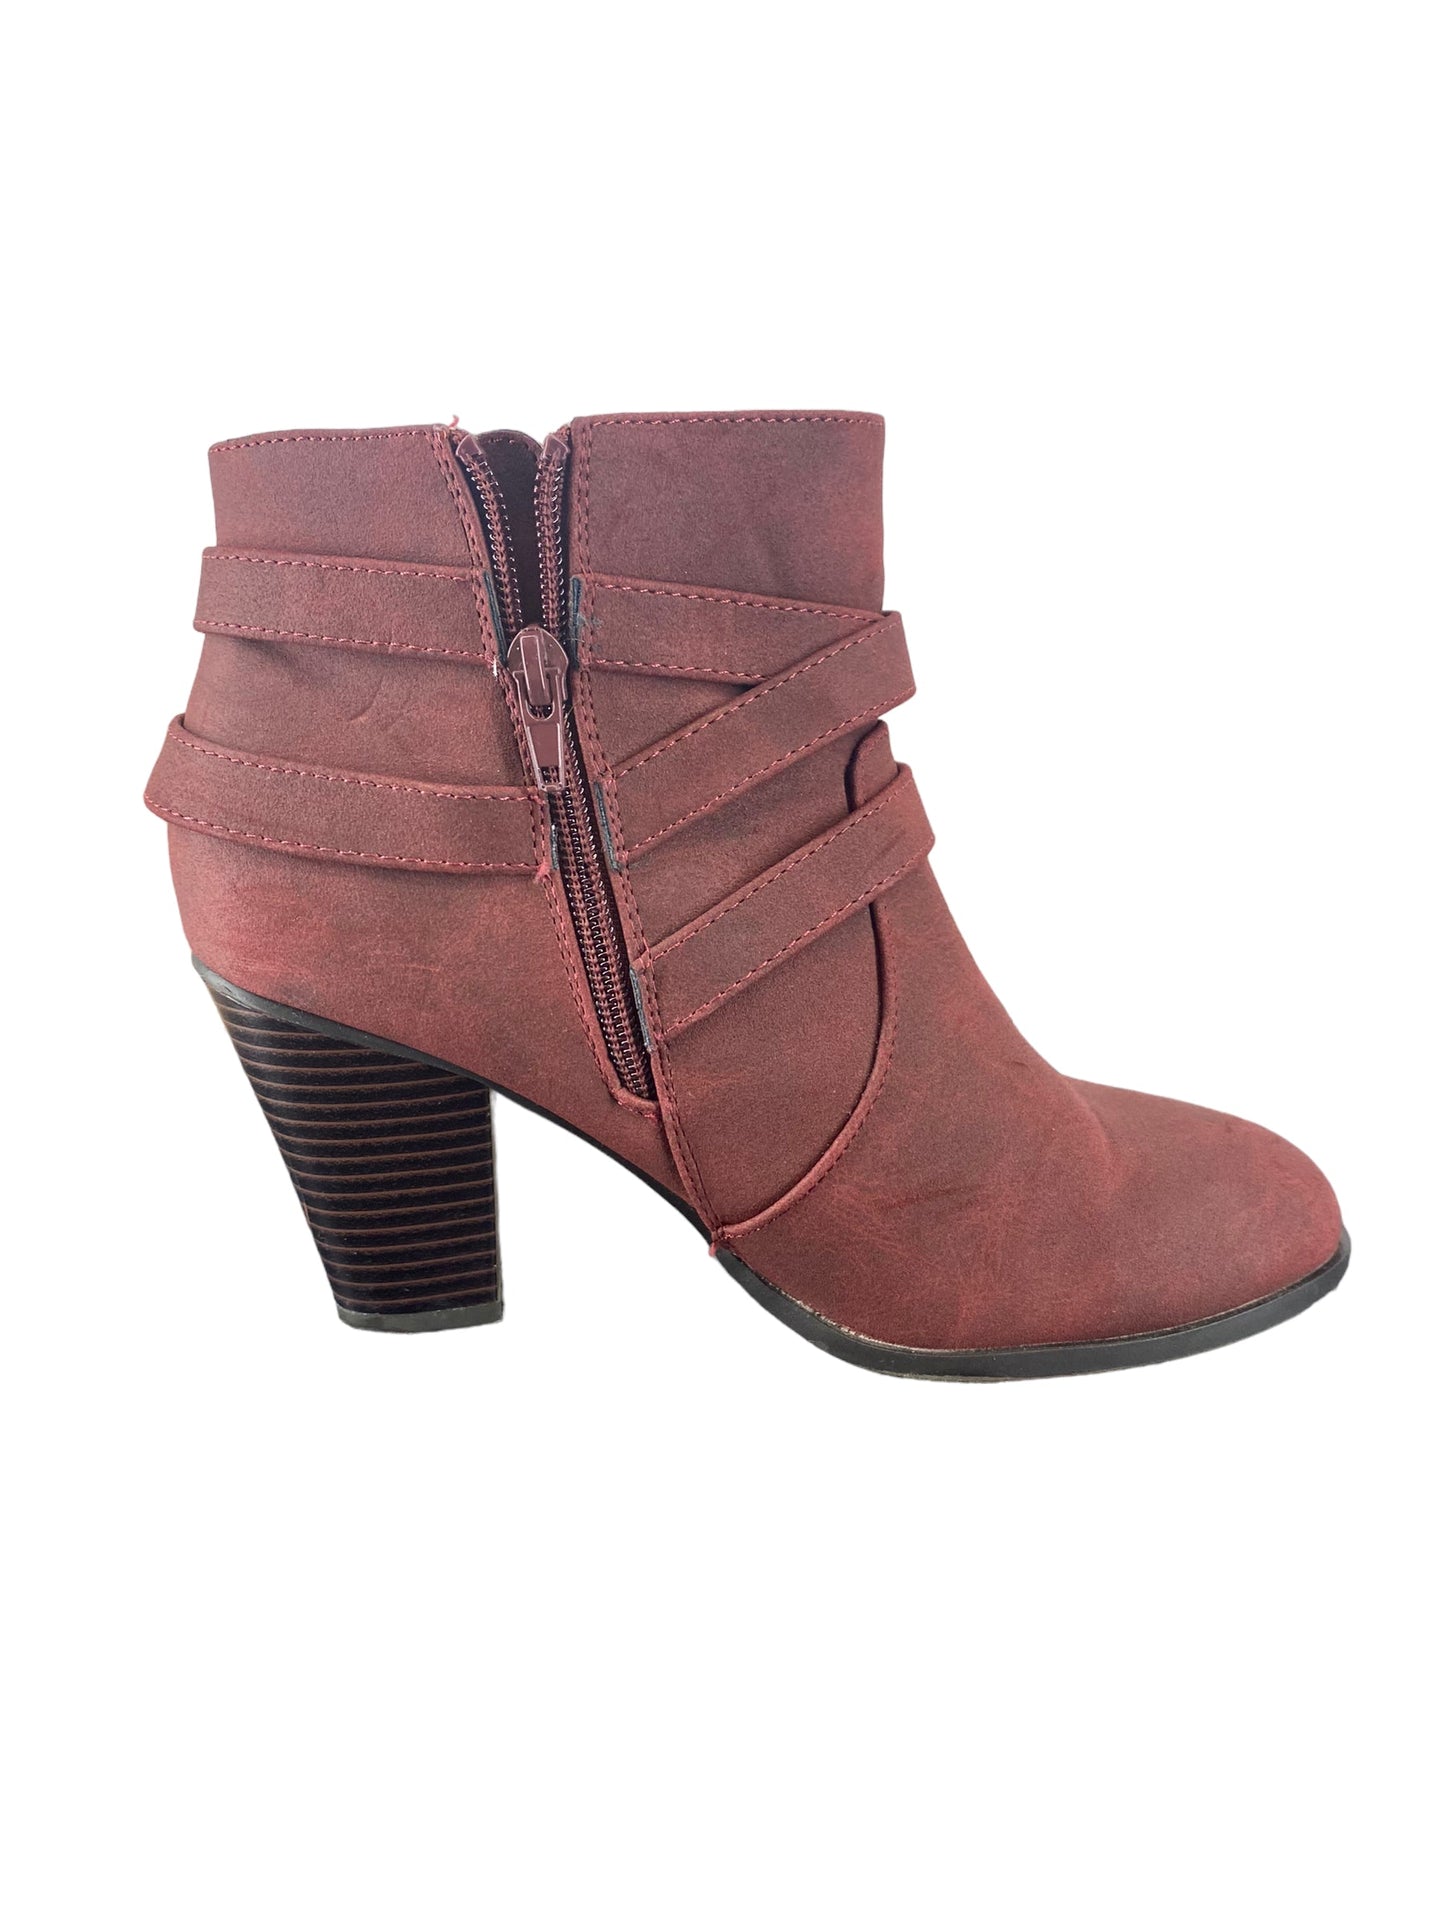 Boots Ankle Heels By Just Fab  Size: 9